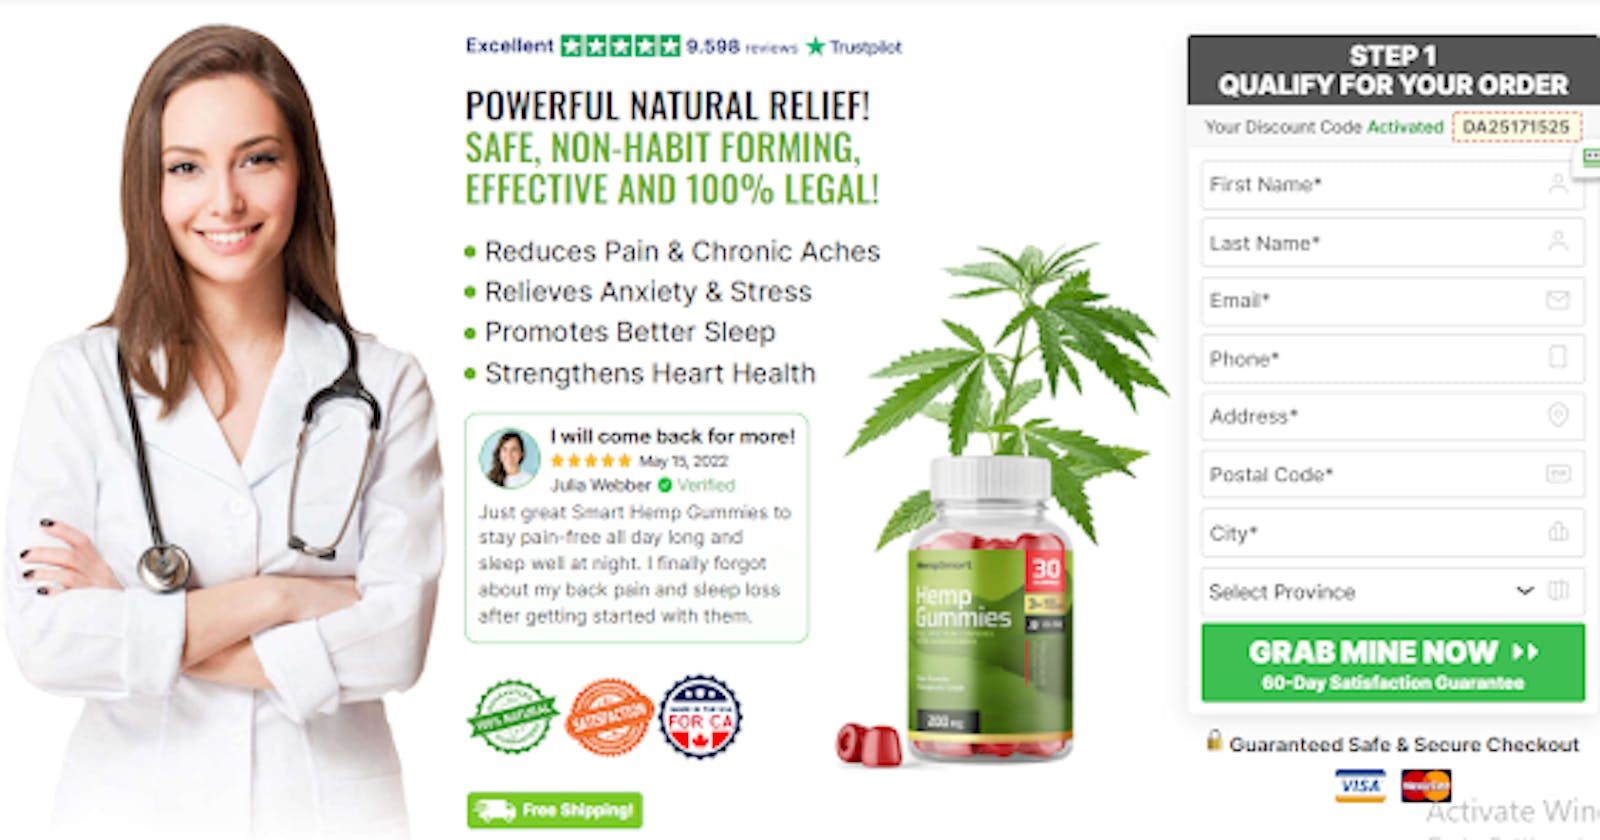 Easy Leafz CBD Gummies Canada: SAFE, NON-HABIT FORMING, EFFECTIVE AND 100% LEGAL!